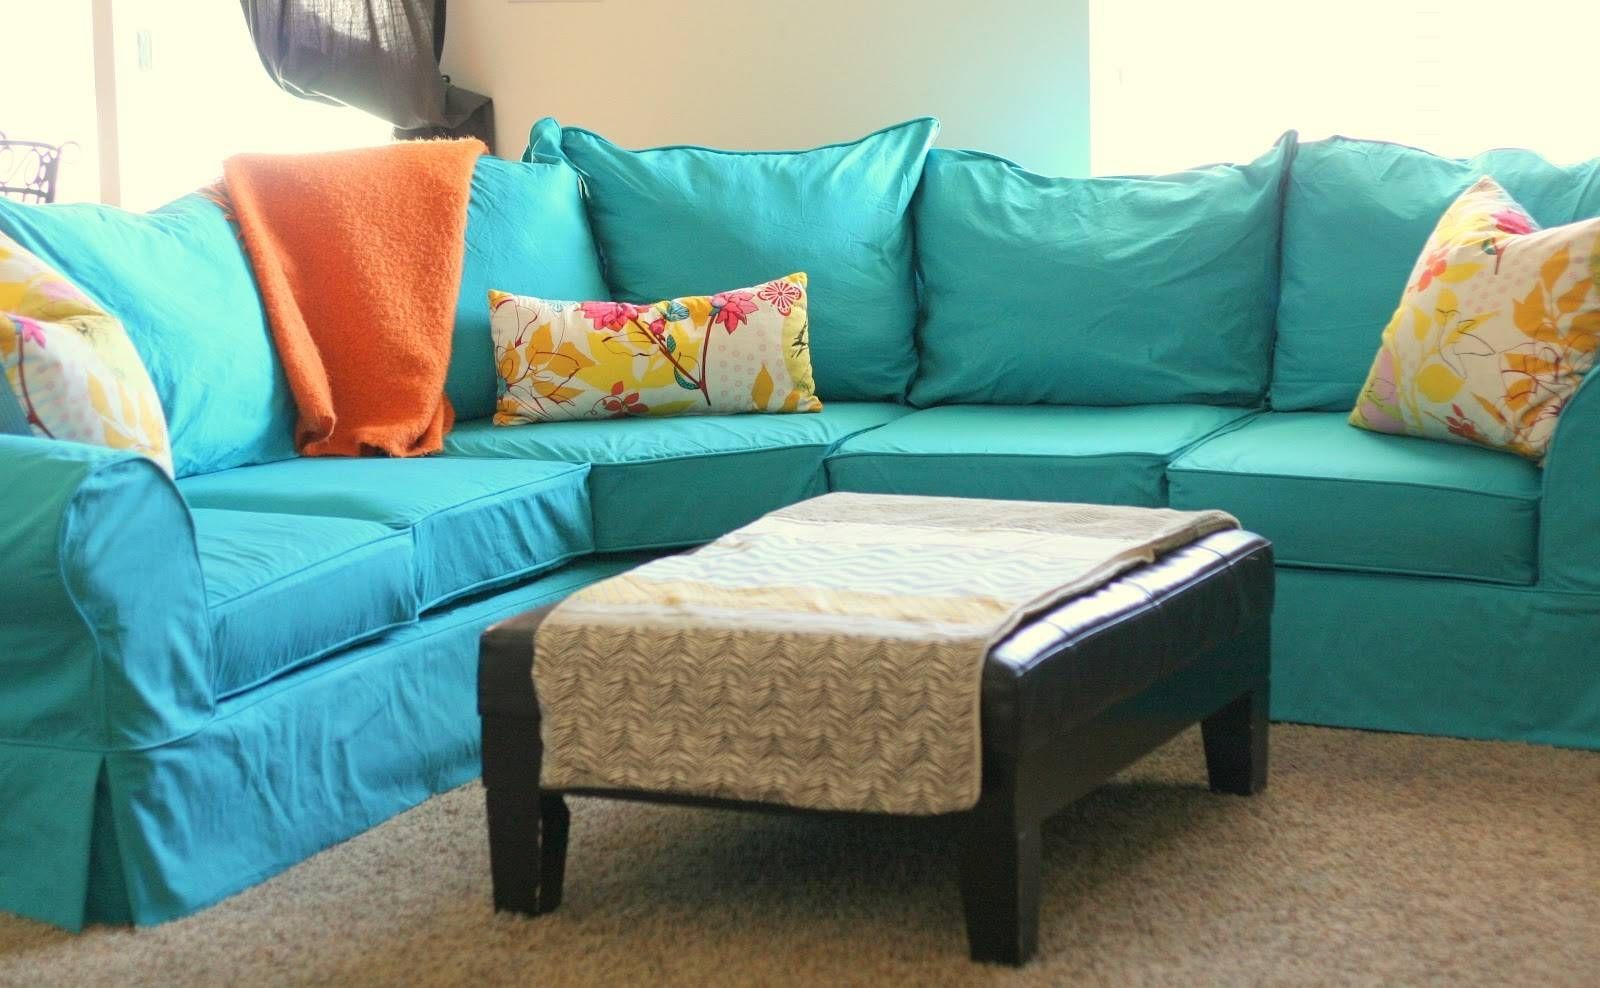 Slipcovers For Leather Couches | Homesfeed In Slipcover For Leather Sofas (View 8 of 30)